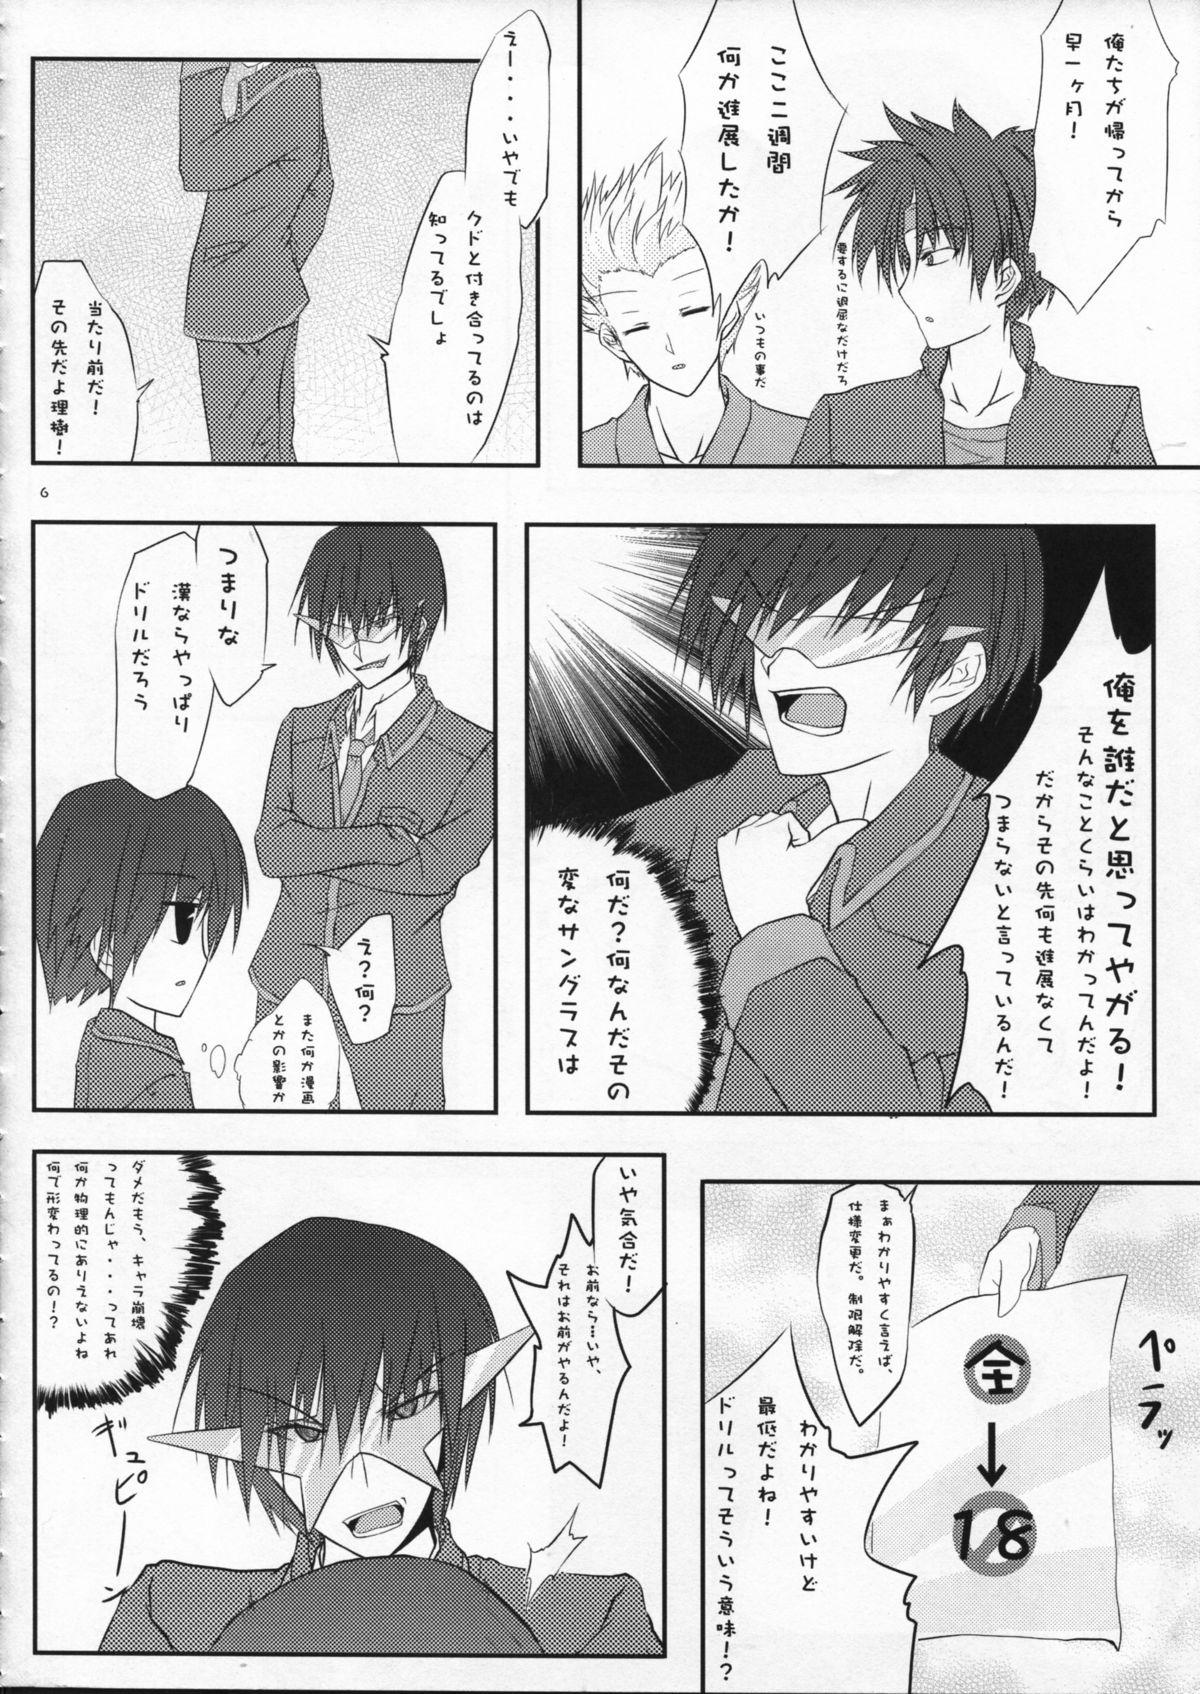 Fishnets Wanko no Jikan - Little busters Gay Dudes - Page 6